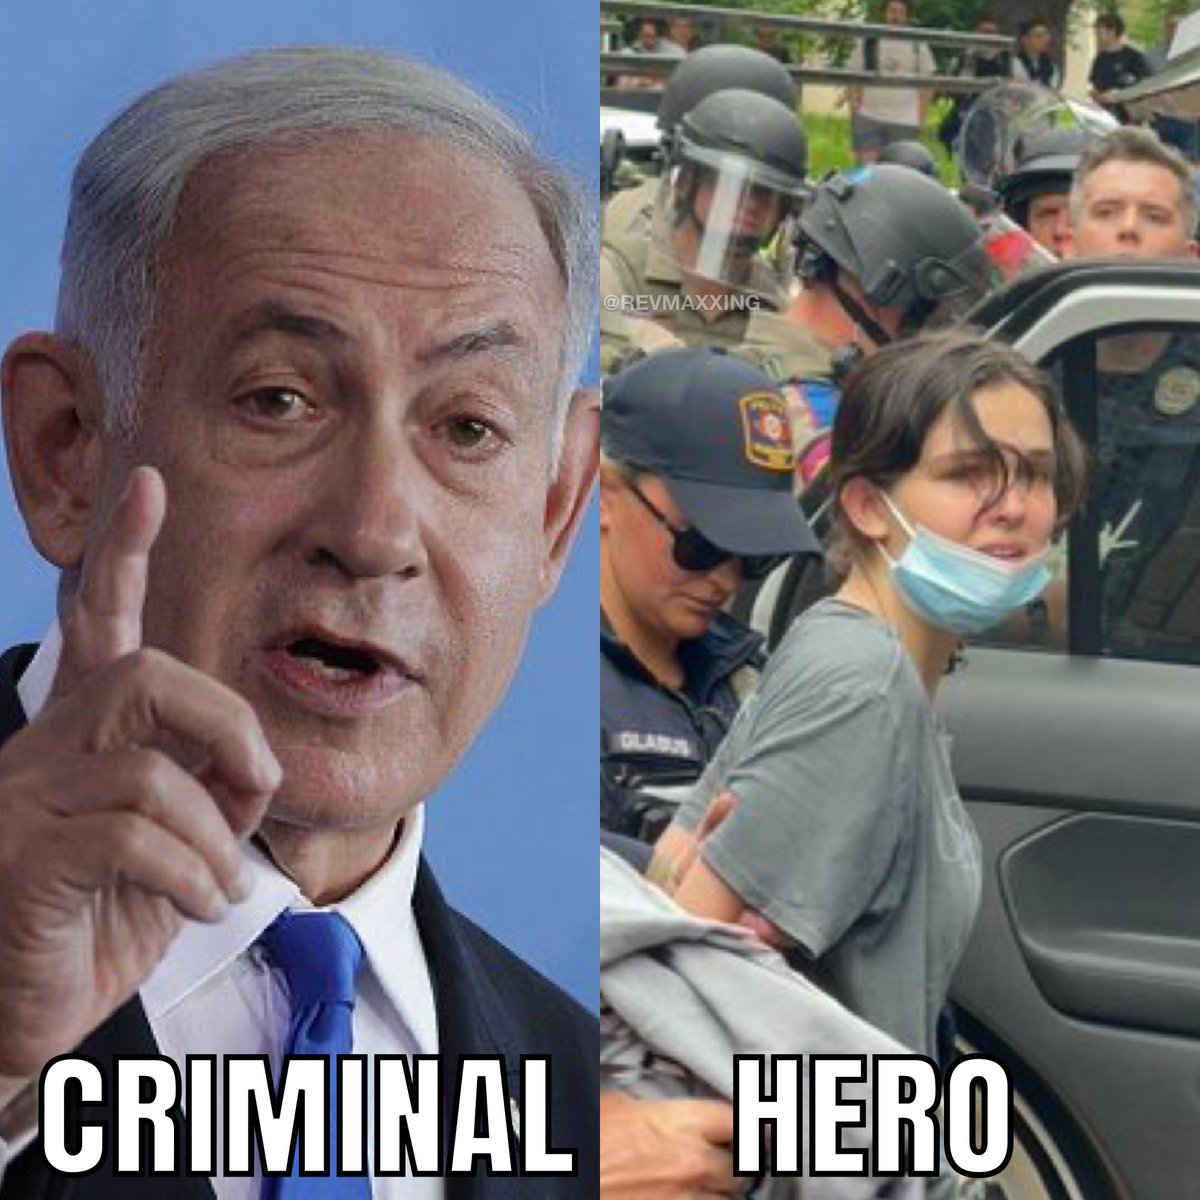 KNOW THE DIFFERENCE! The person on the left is a CRIMINAL! The person on the right is a HERO!